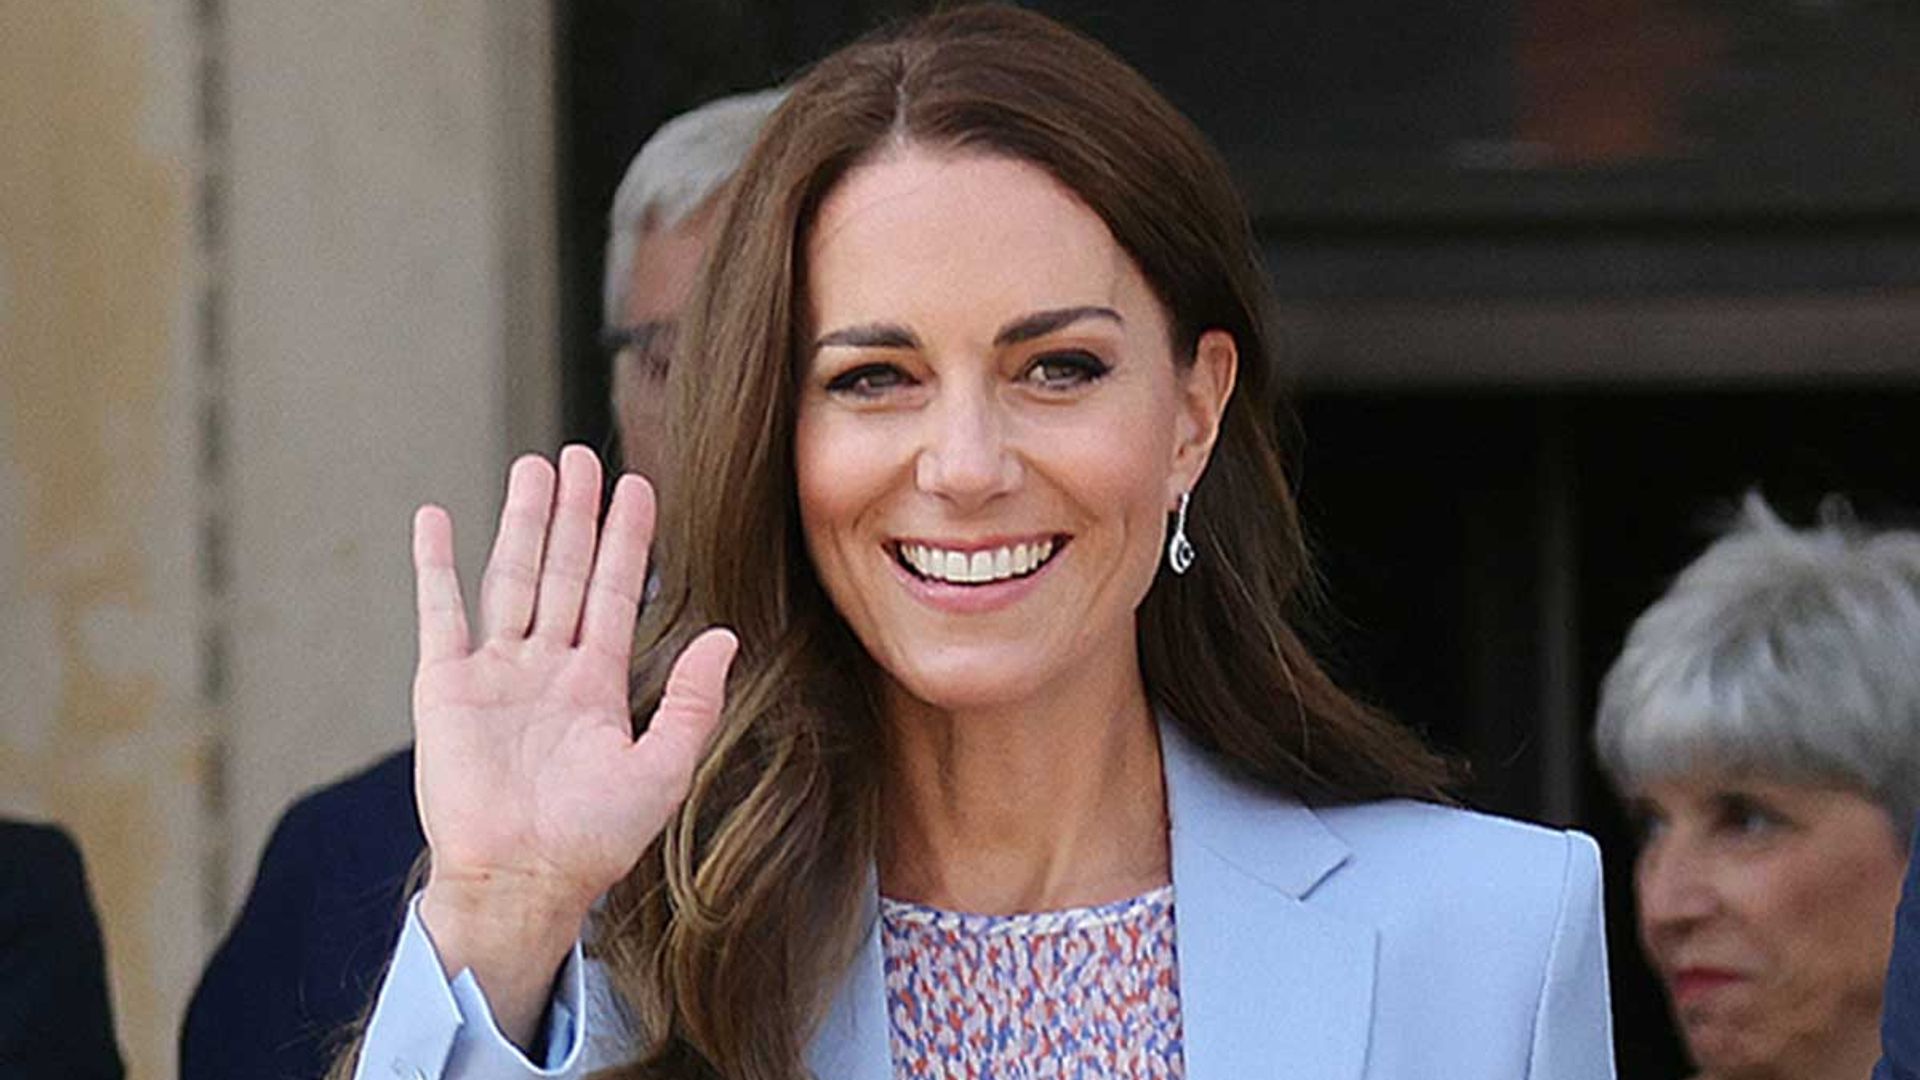 Kate Middleton looks truly breathtaking in the sleekest coat and heels